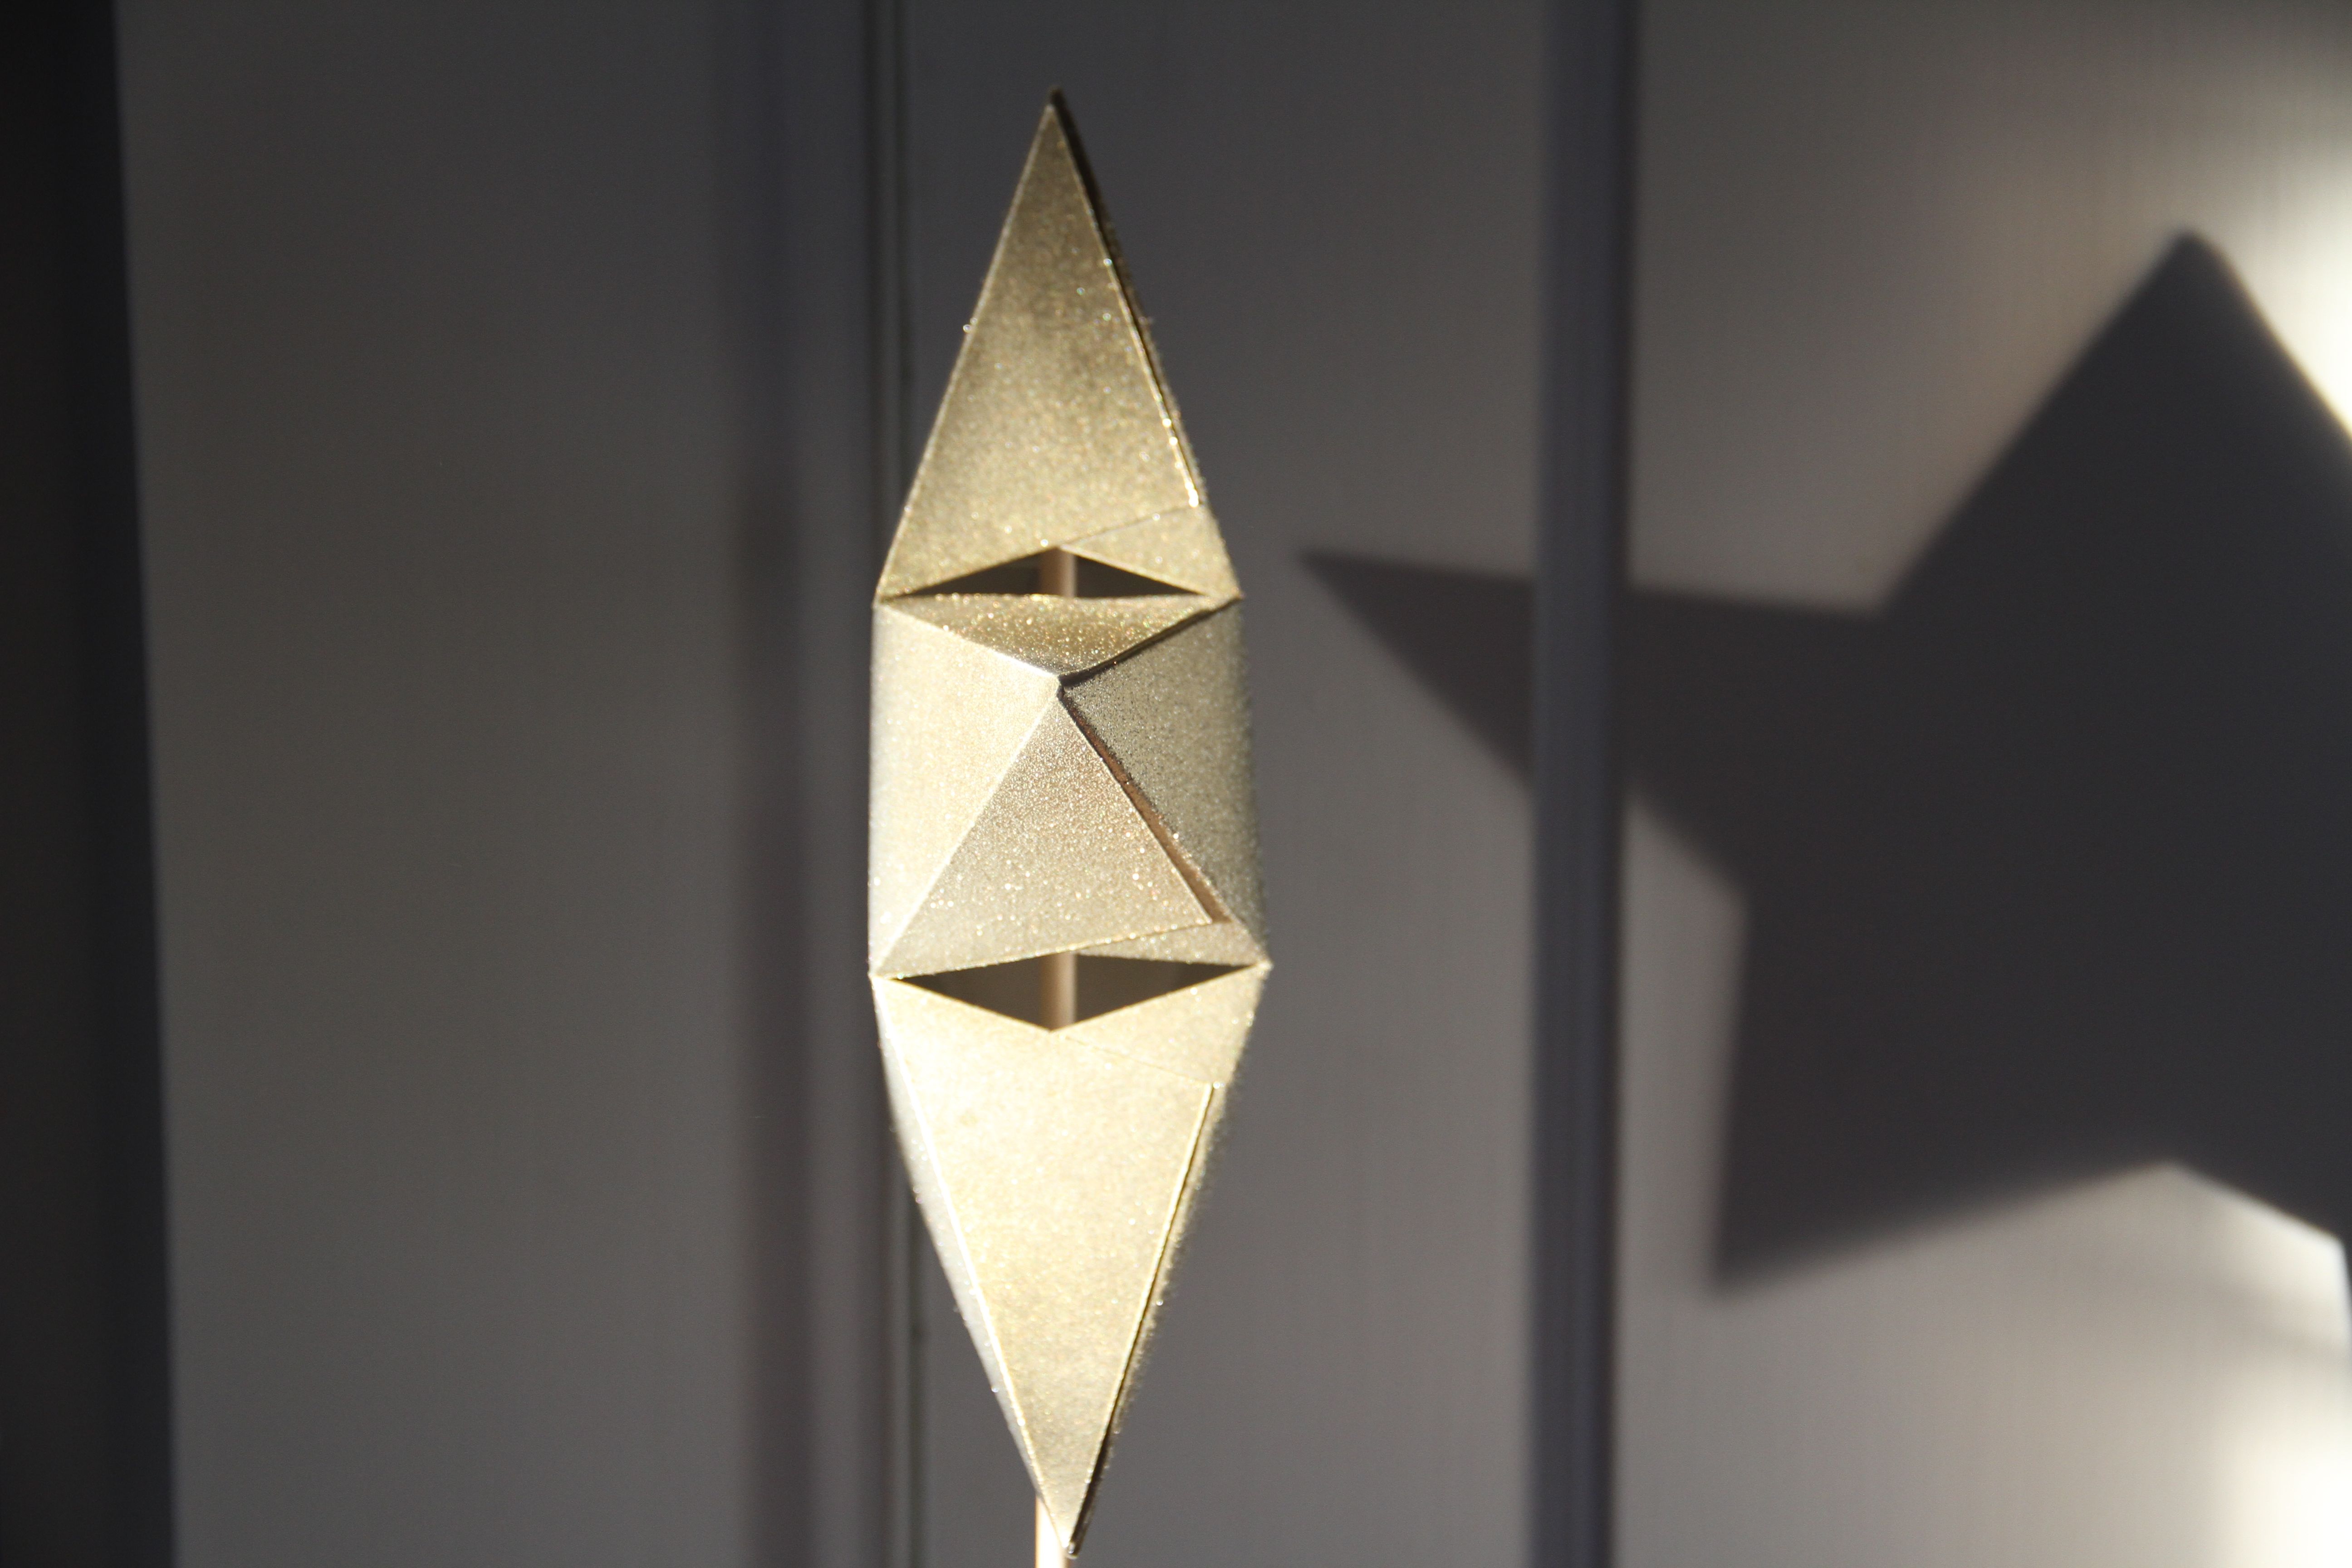 Side view of the star. I made this out of card stock, which I also later sprayed with gold, silver and glitter spray paint. It's a 2-sided, 3 dimensional piece held together by glue stick, patience and luck.